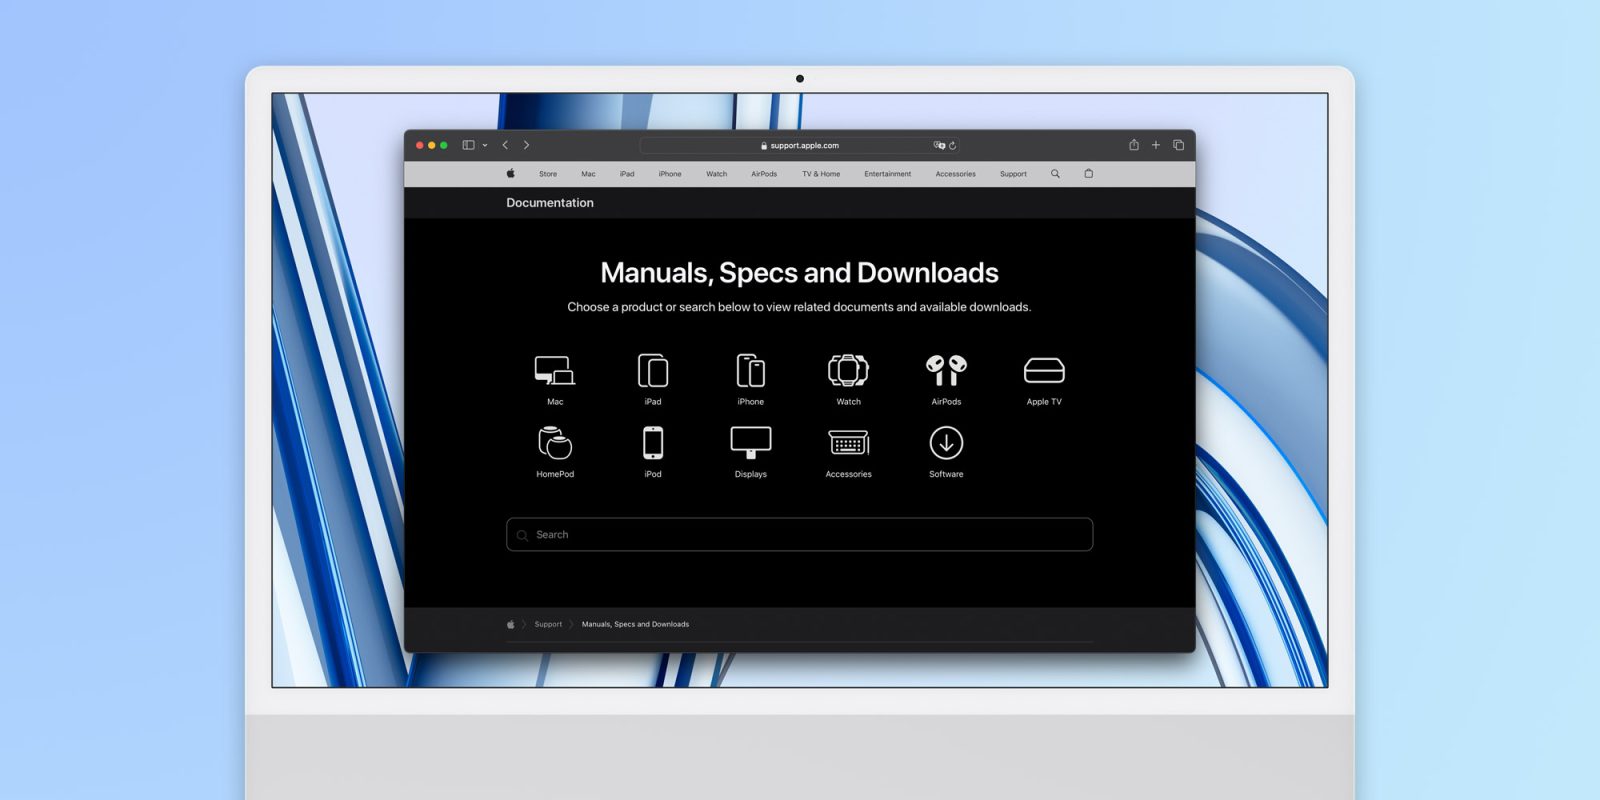 New page on Apple's website helps users find product manuals and guides